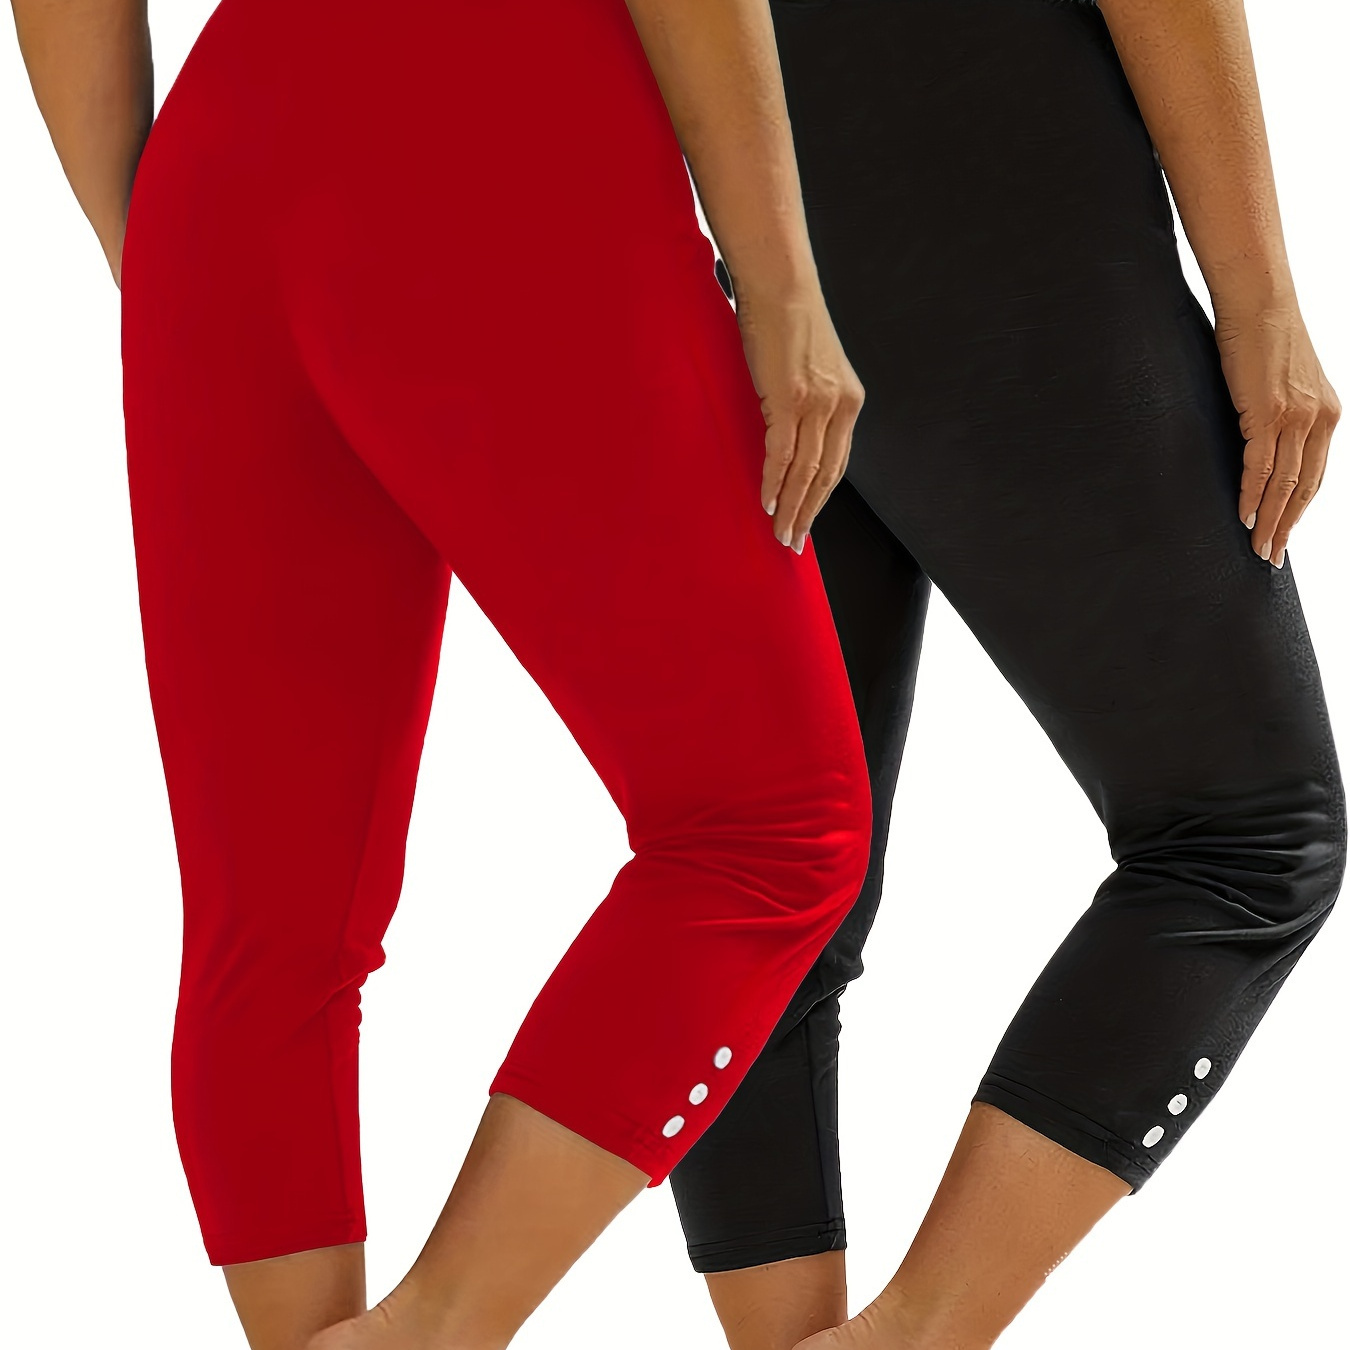 

2-pack Women's Capri Leggings, Fashion Athletic Tight-fit Yoga Pants, Sport Style, High-waist With Button Accents, Breathable Stretch Fabric, Summer Activewear